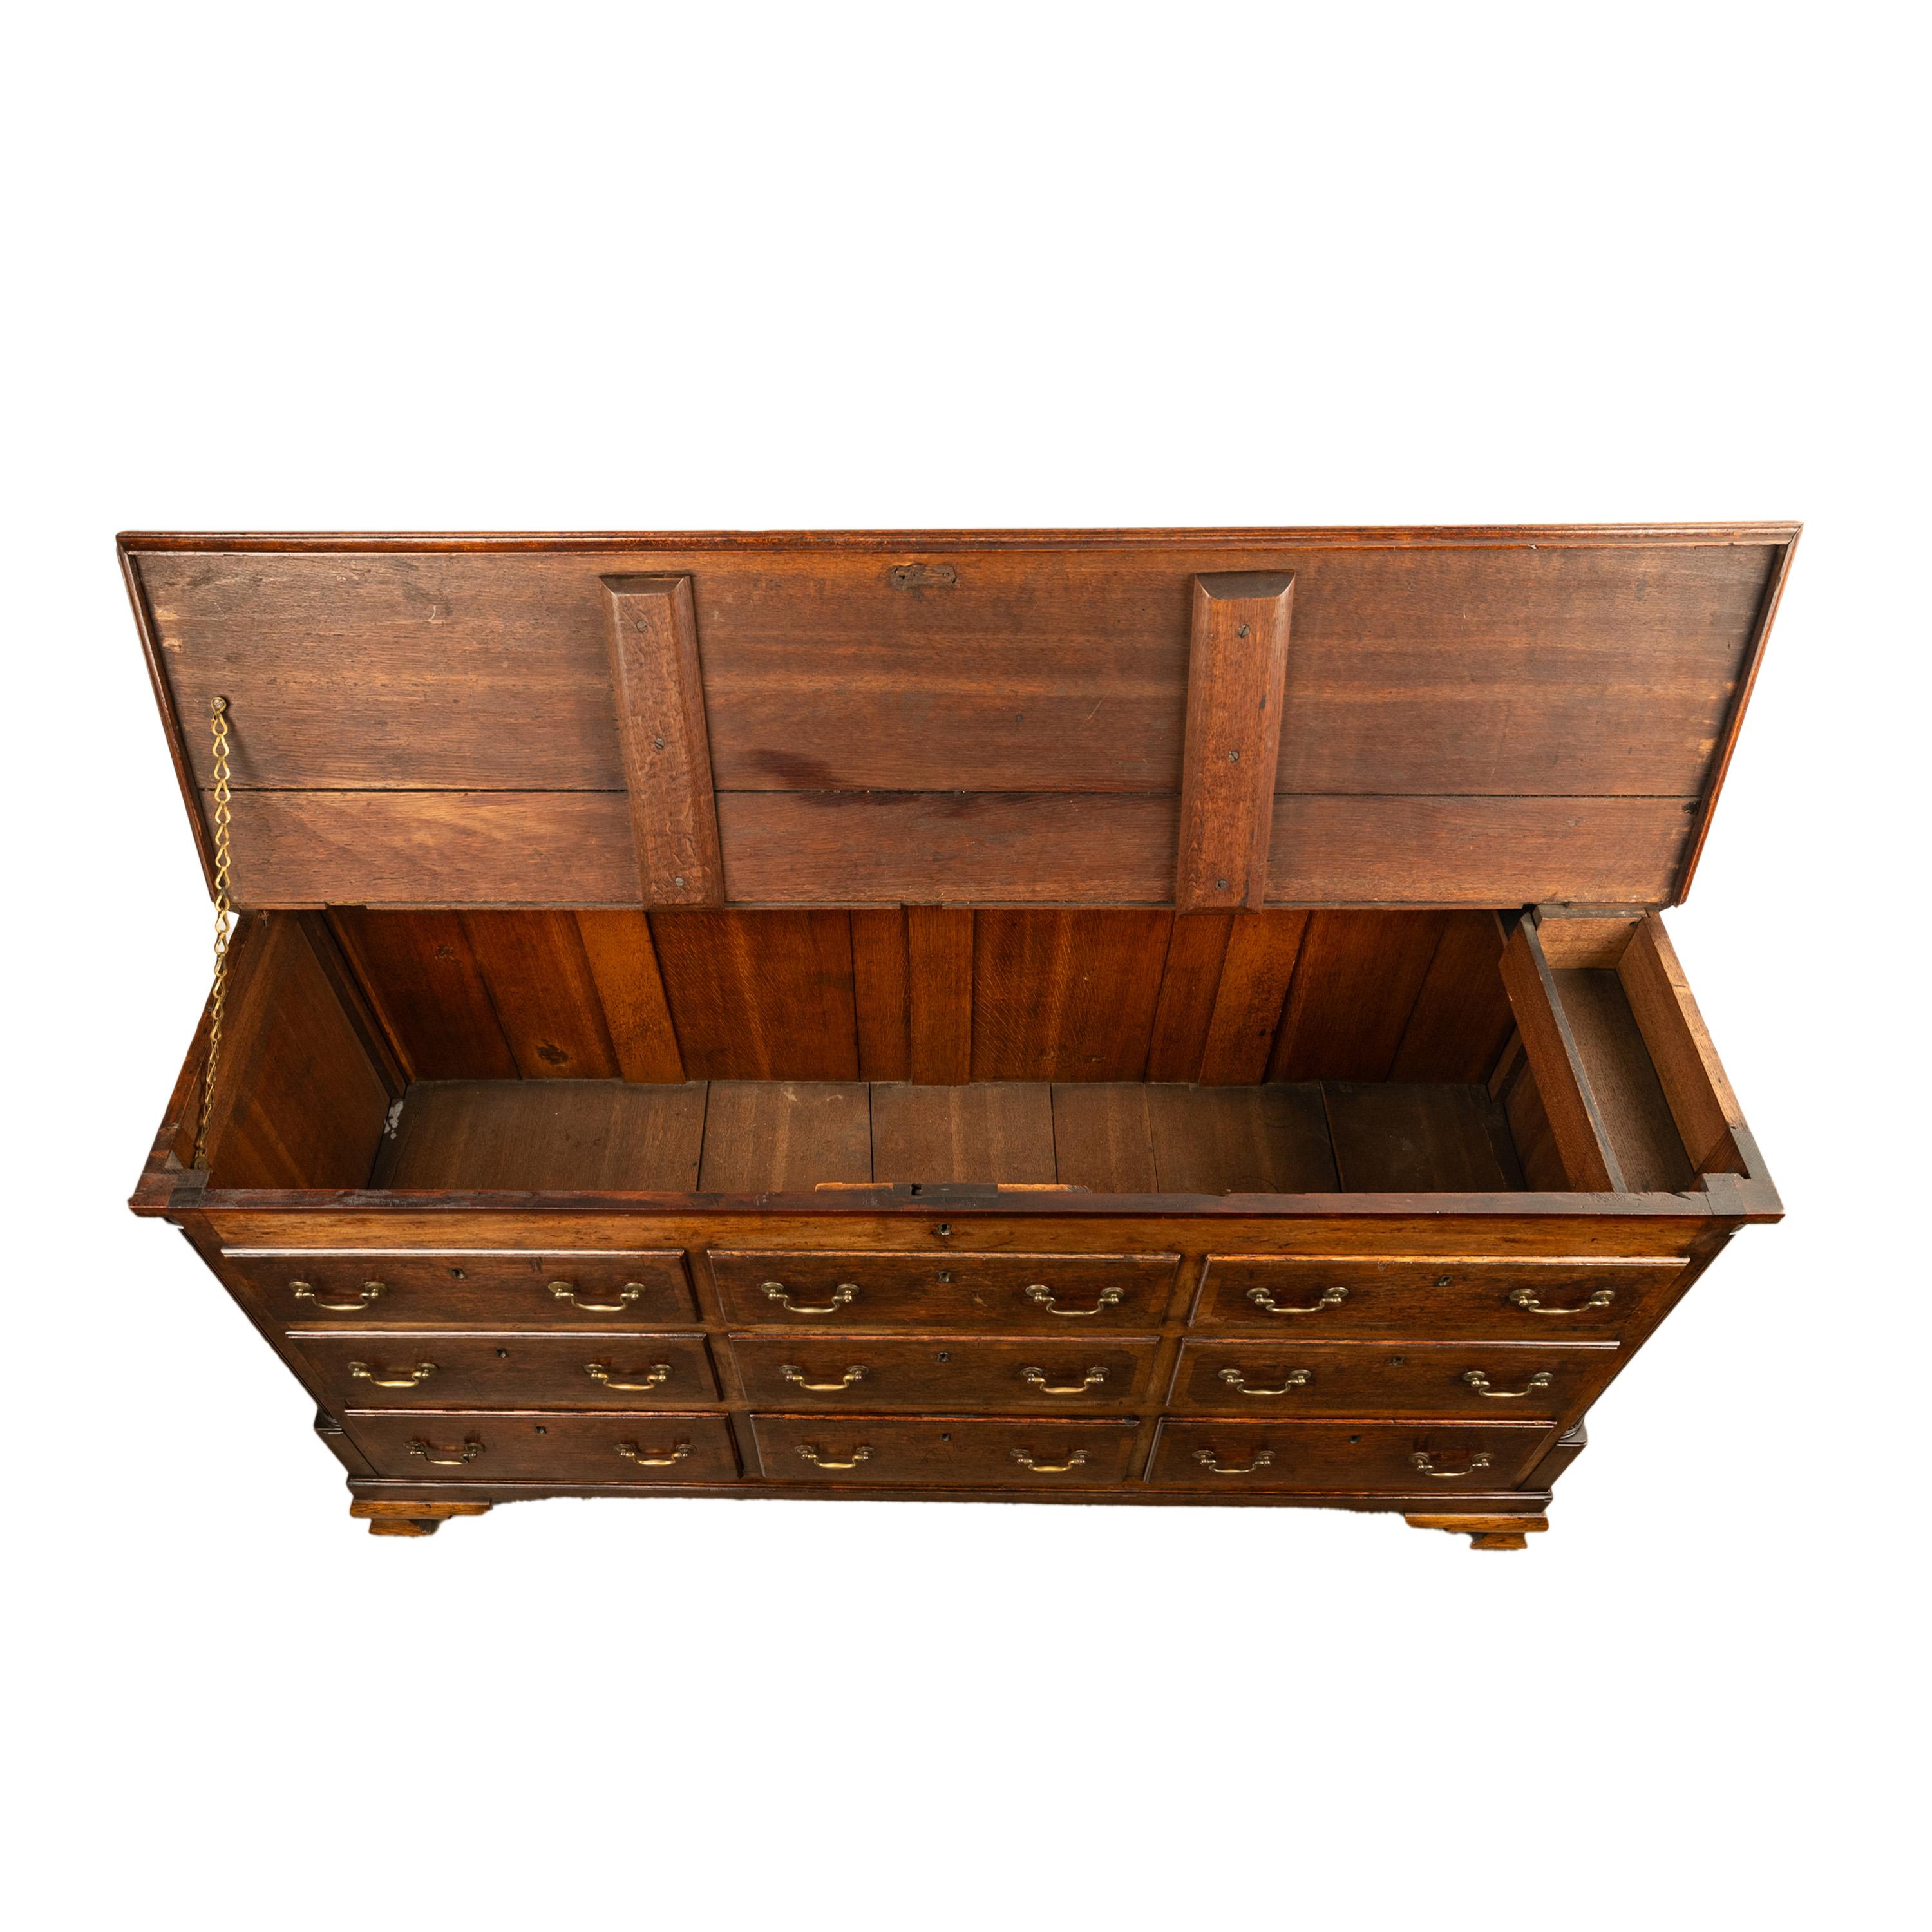 Antique 18th C Georgian Oak Mahogany Hinged Top Mule Chest Coffer Sideboard 1770 For Sale 2